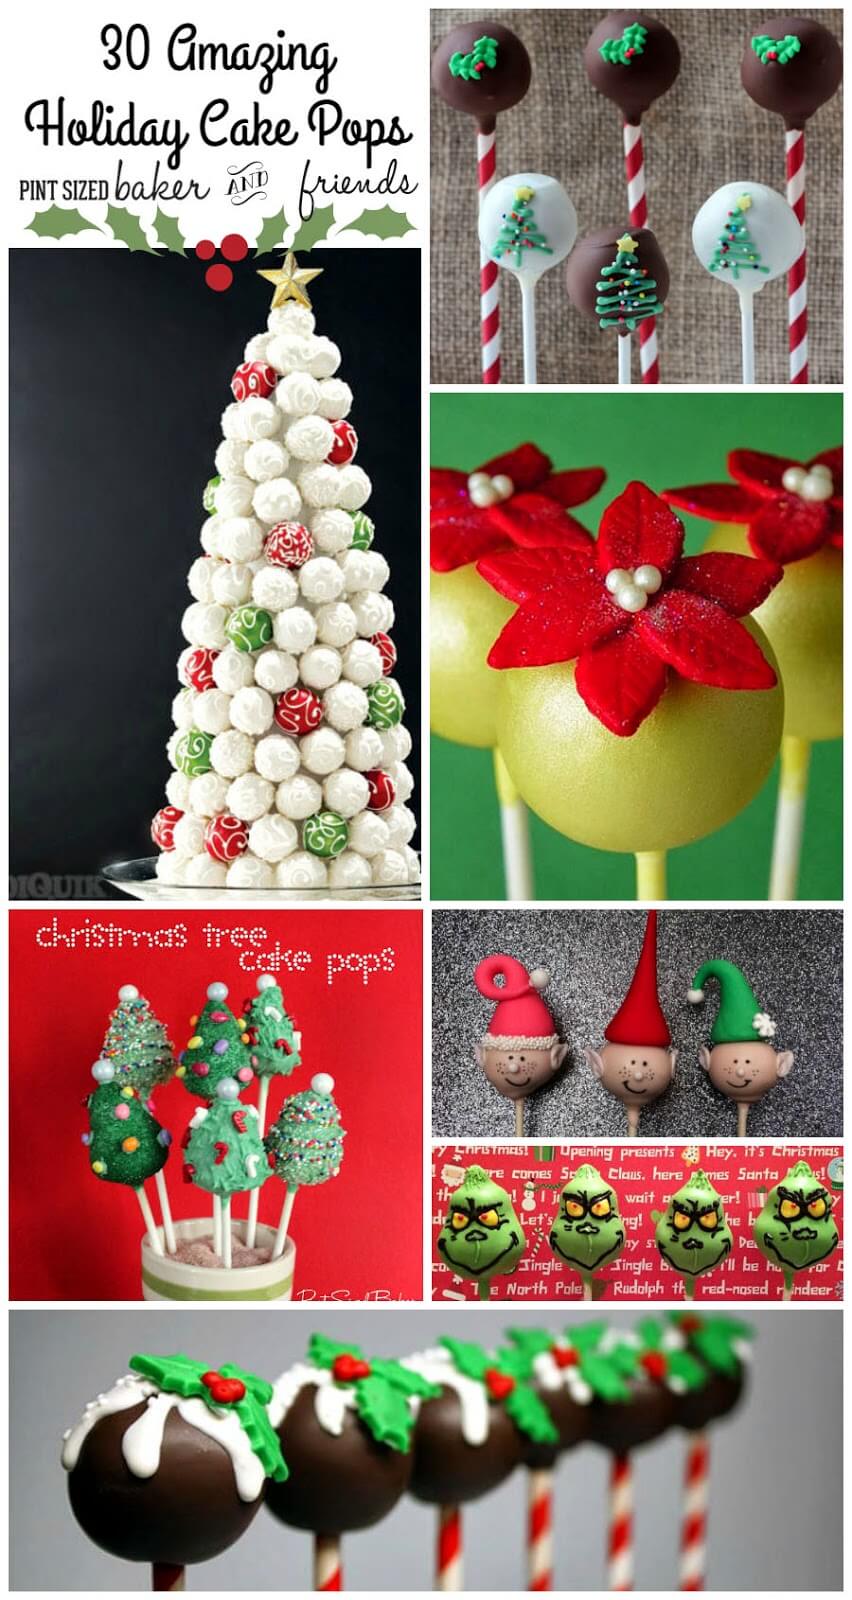 302BChristmas2BCake2BPops2BCollage